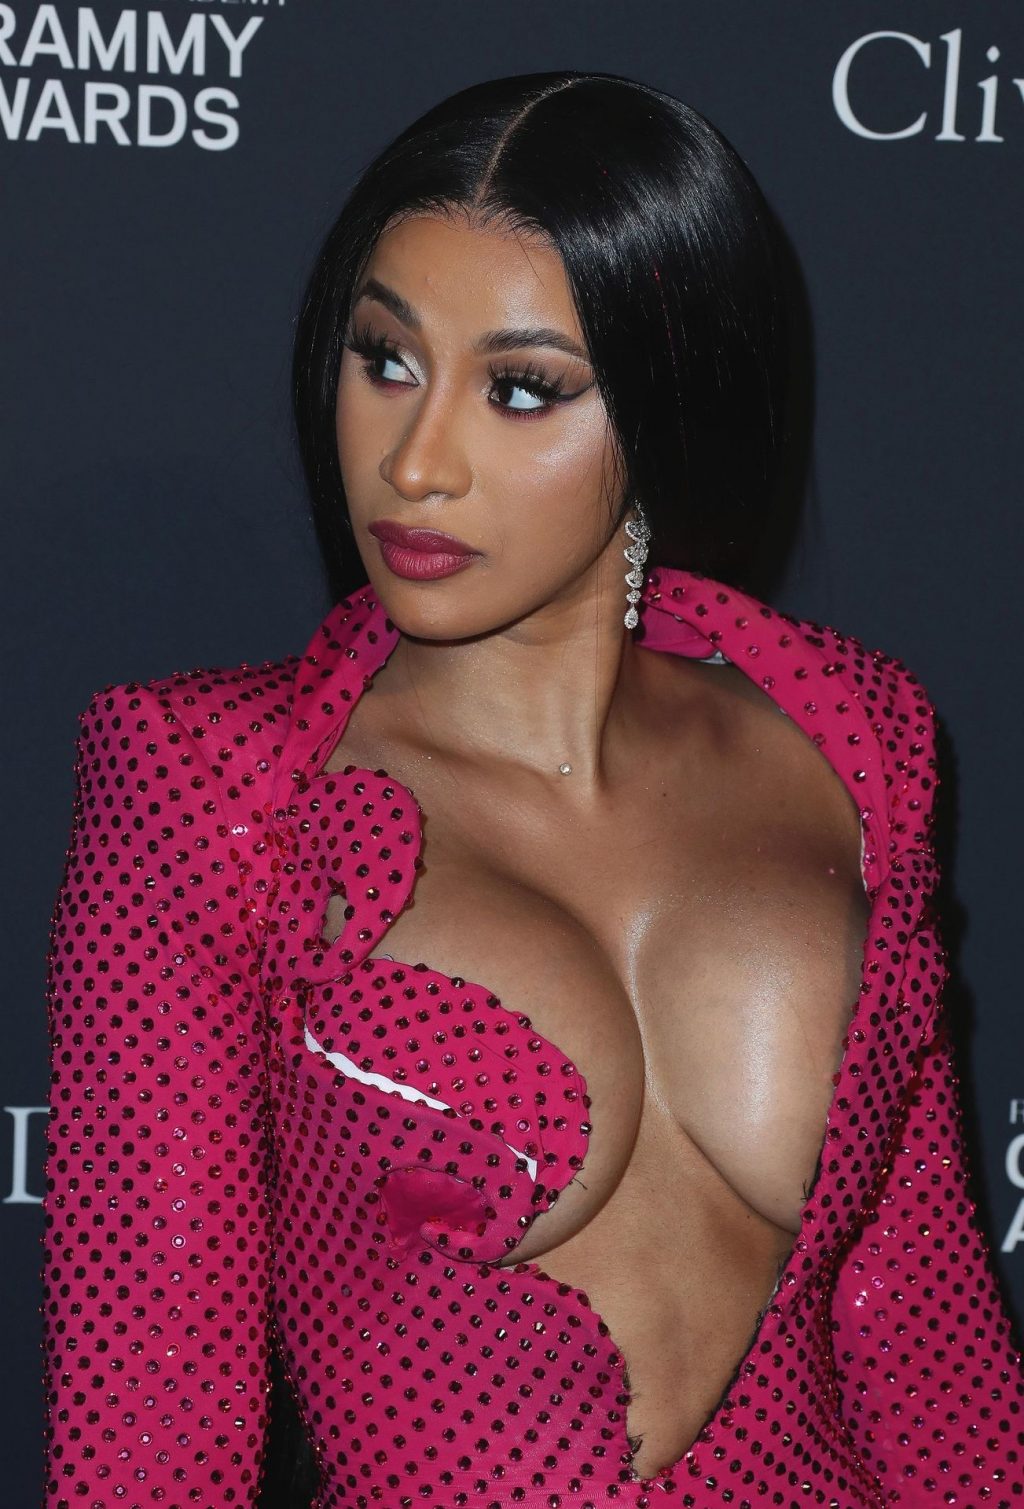 Offset Covers Cardi B’s Boobs to Avoid Wardrobe Malfunction at Clive Davis Pre-Grammy Party (114 Photos)